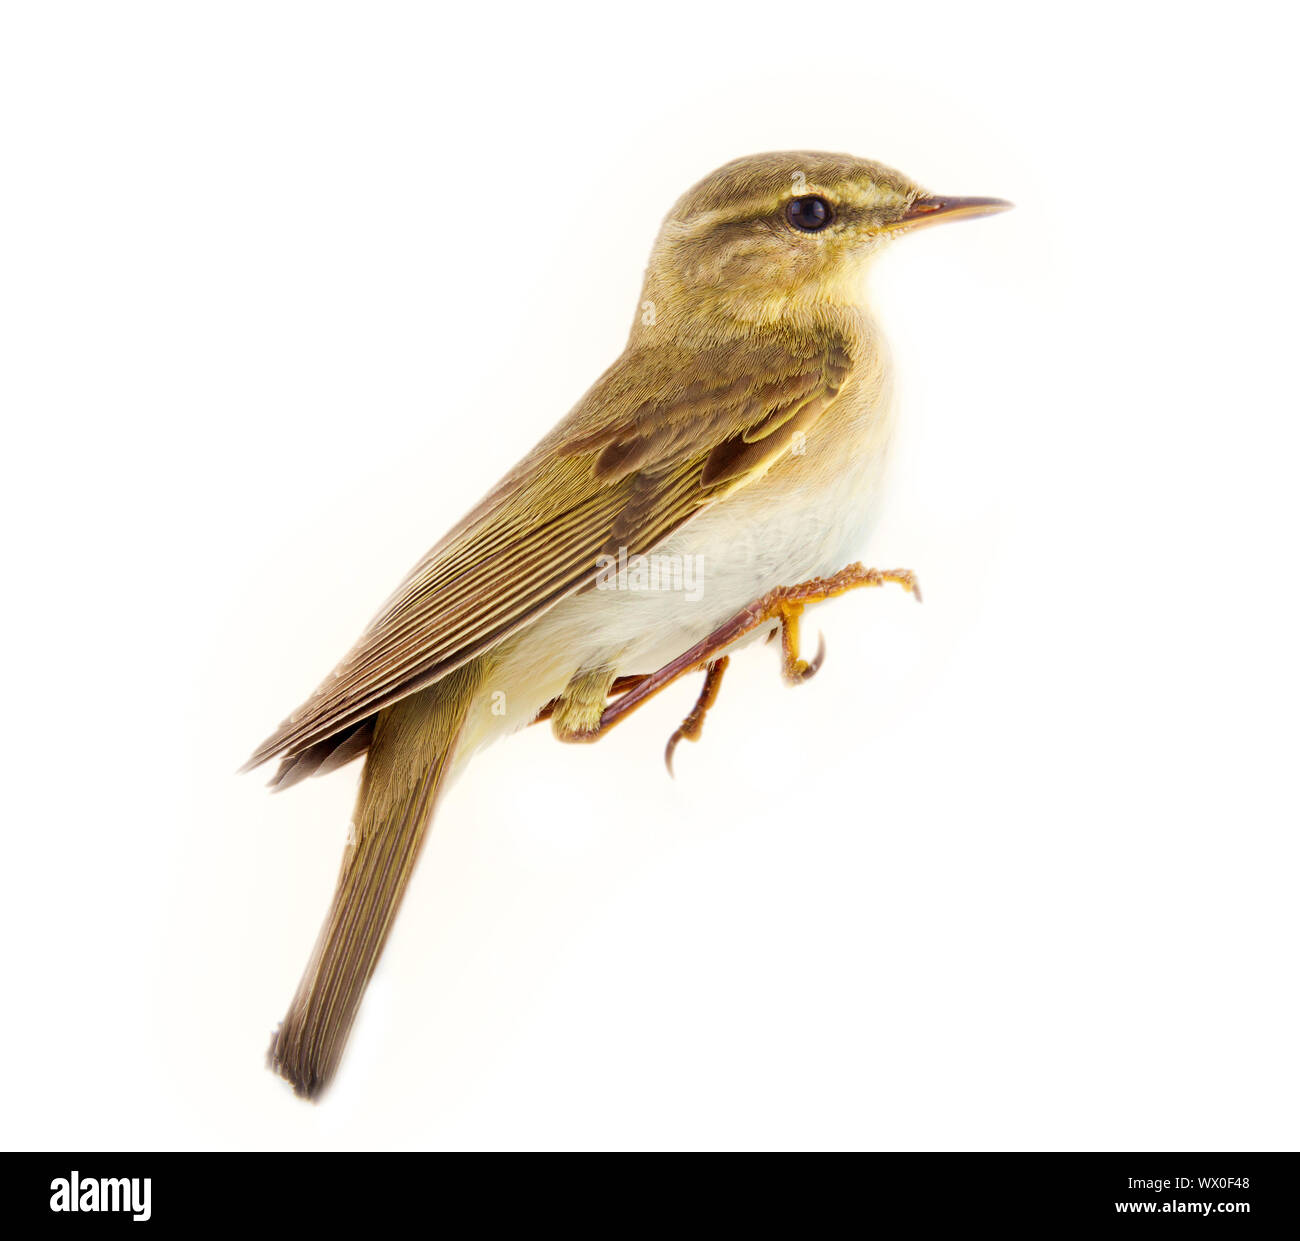 Willow warbler (Phylloscopus trochilus) Banque D'Images